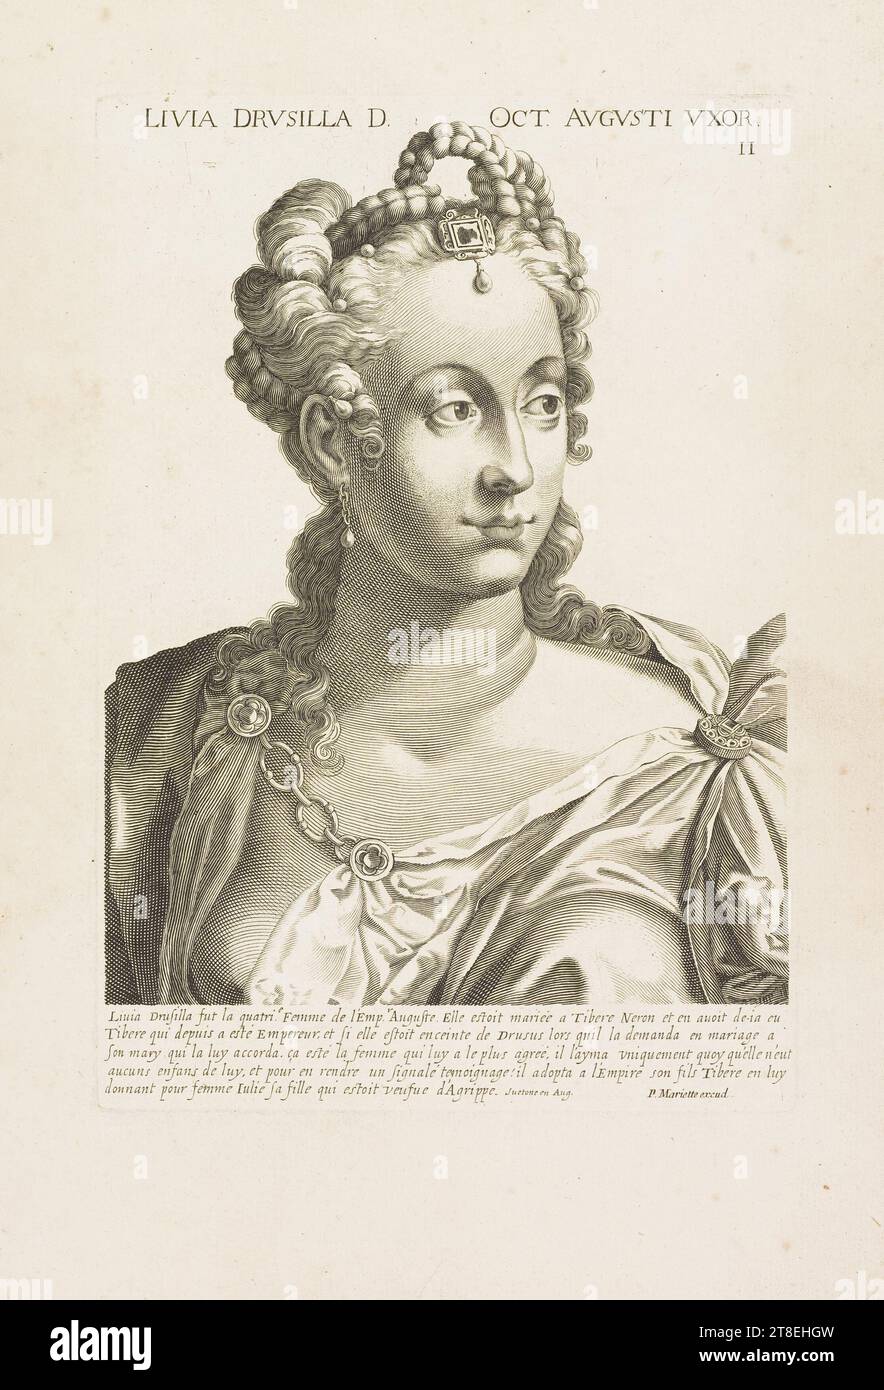 LIVIA DRUSILLA D. OCT. AVGVSTI VXOR. II. Liuia Drusilla made the fourth. Wife of Empr. Augustus. She was married to Tiberius Neron and had de-ia had Tiberius who since then has been Emperor, and if she was in cente of Drusus when he asked her in marriage to her husband who granted her. She was the woman who most pleased him, and he only married her even though she had no children of his own, and as a sign of this, he adopted his son Tiberius into the Empire, giving him his daughter Iulia, widowed of Agrippo Stock Photo